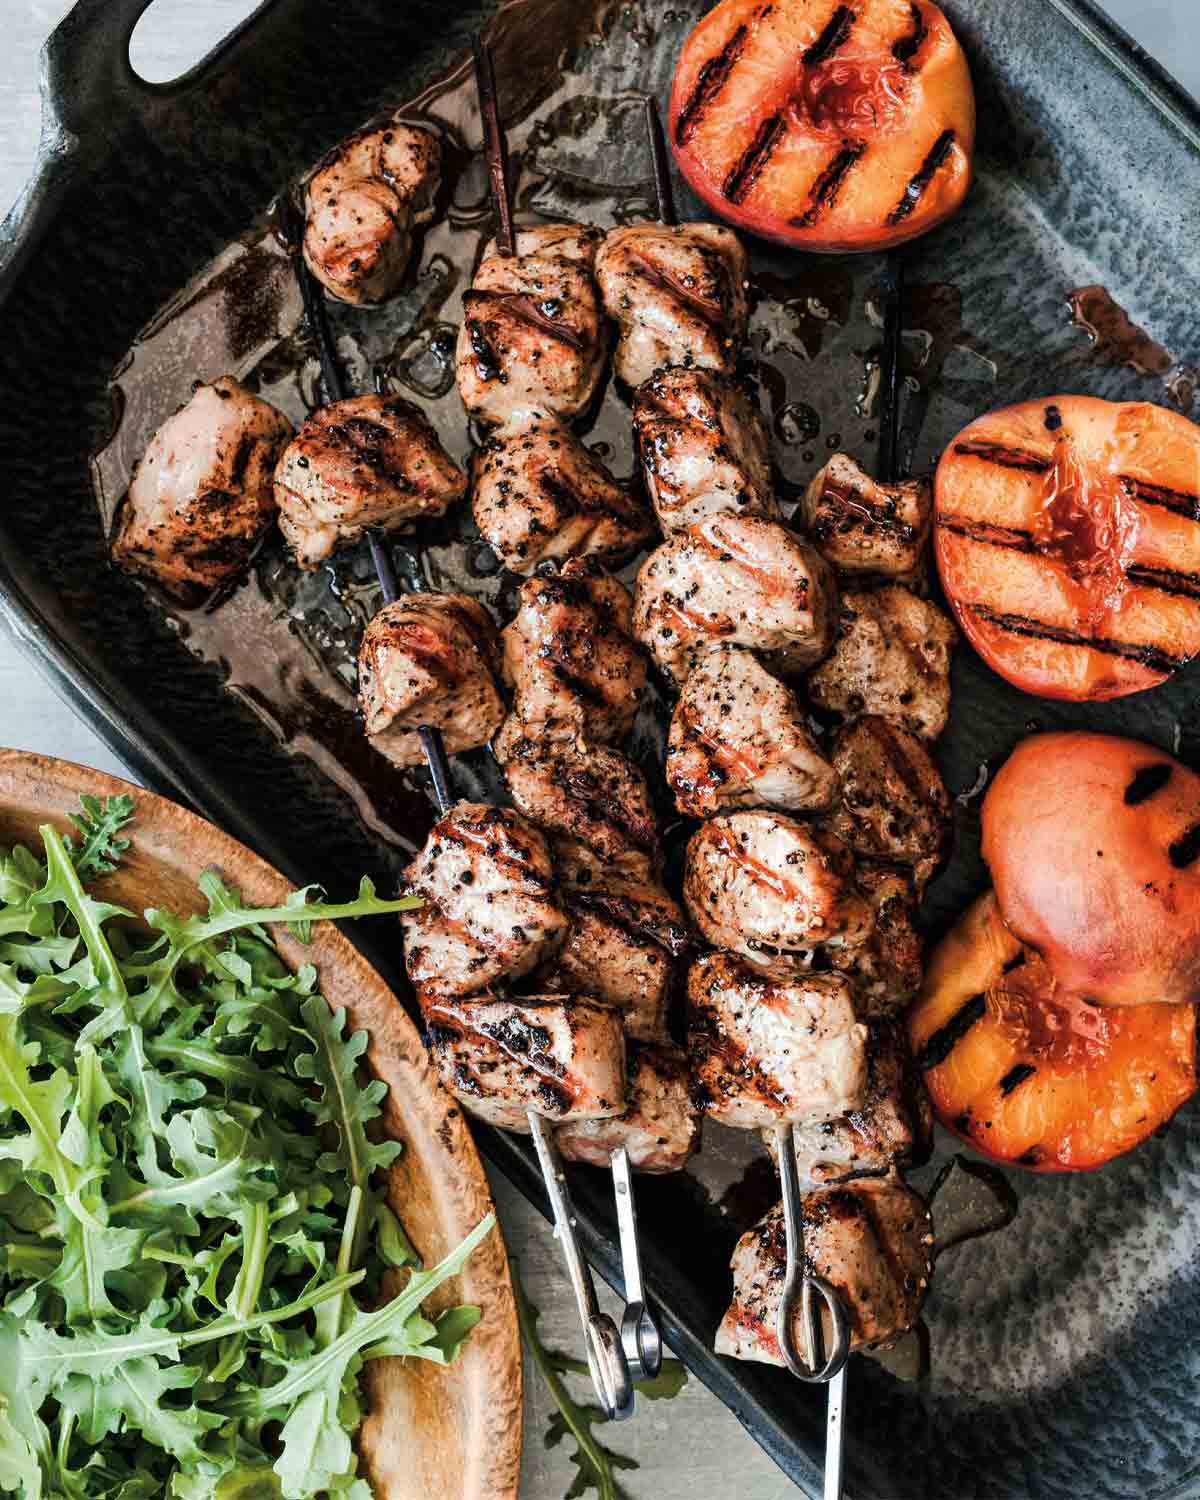 Four grilled pork skewers with peaches in a metal dish with a wooden bowl of arugula beside it.